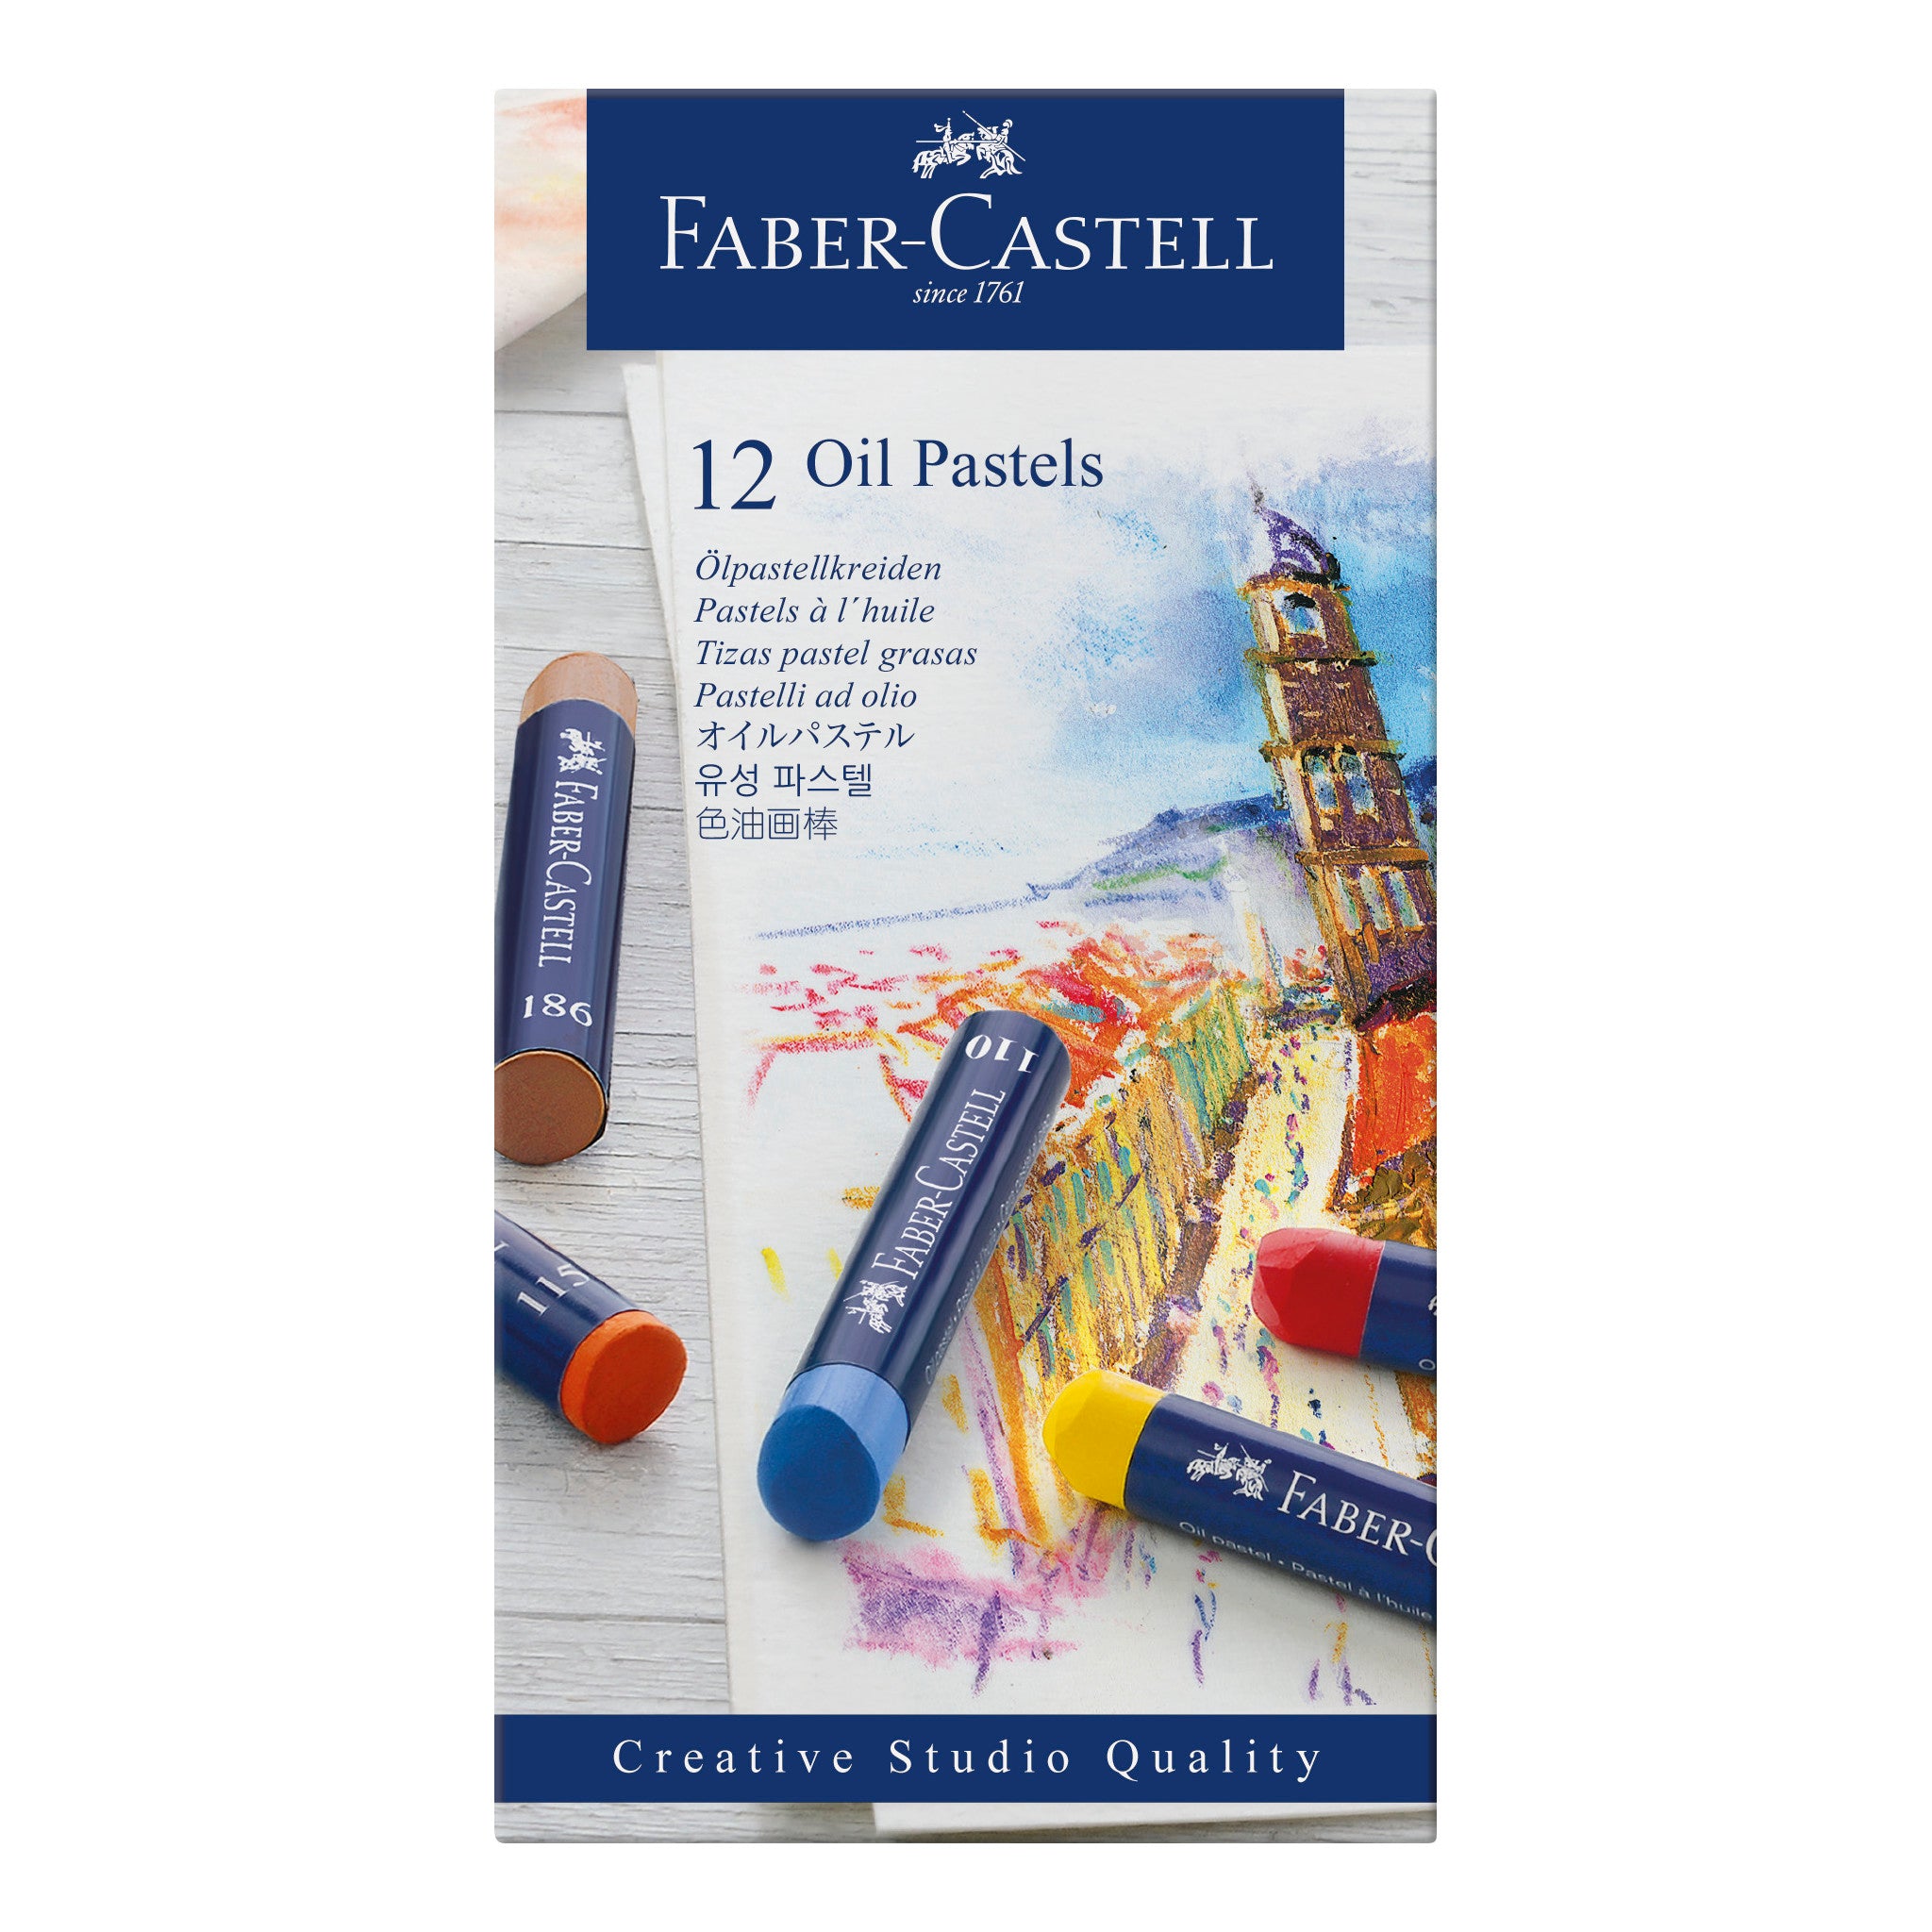 Faber-Castell Oil Pastel Crayons  Oil pastel, Oil pastel crayons, Pastel  crayons